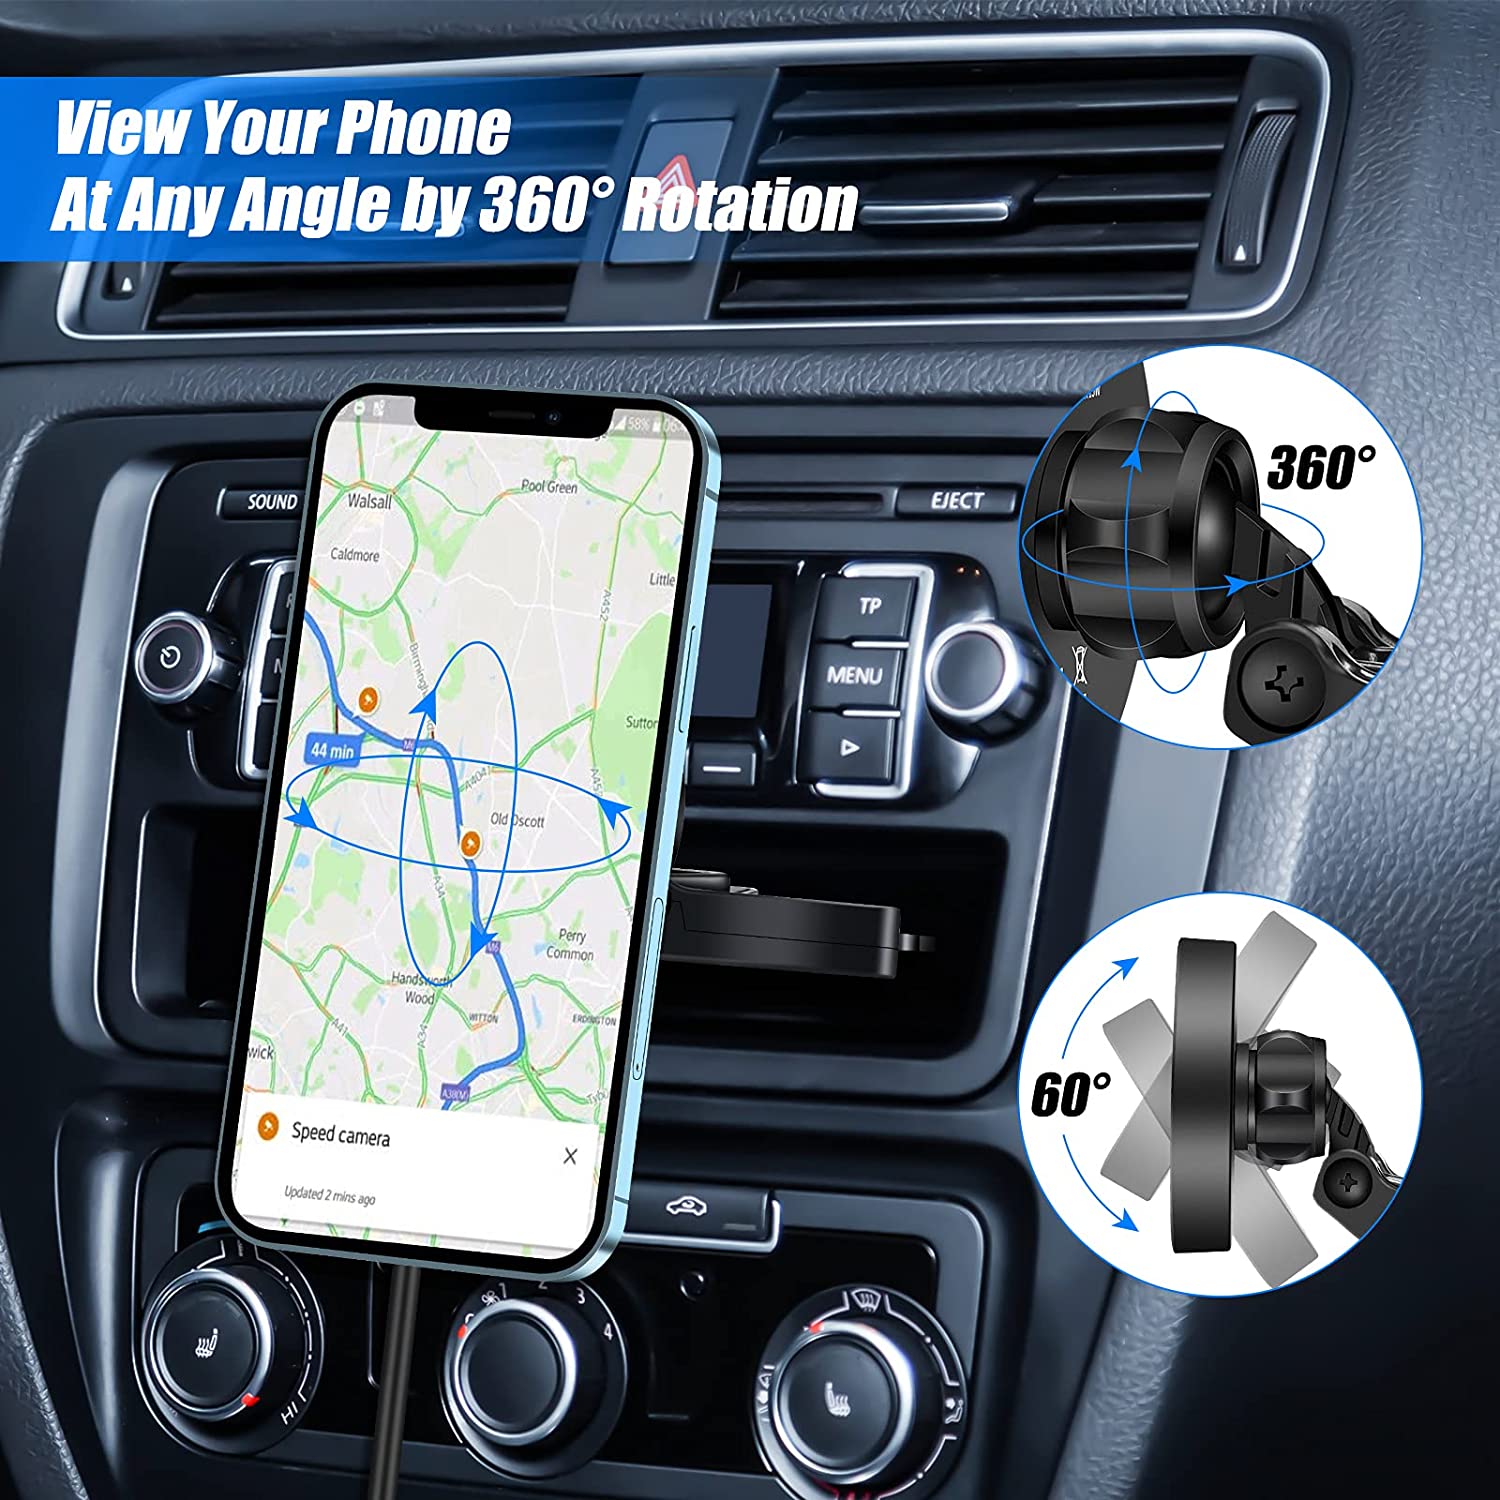 Piosoo 15W Magnetic Wireless Car Charger CD Slot Mount for iPhone 12/12 Pro/12 Pro Max/12 Mini,Powerful Suction Auto-Alignment Mag-Safe Car Mount, Compatible with MagSafe Cases